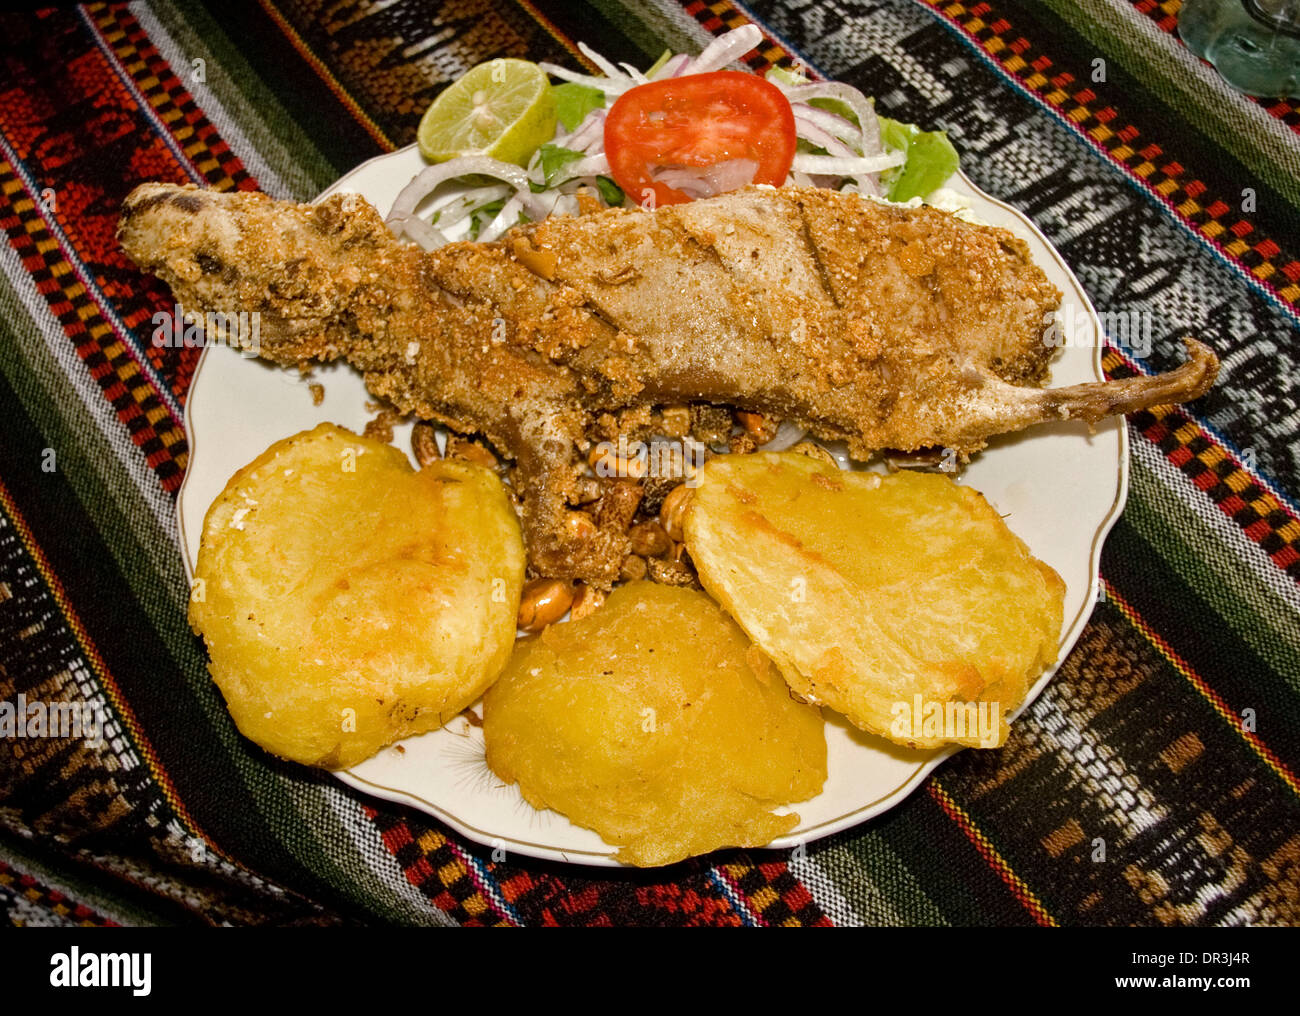 Traditional Peruvian meal of roast guinea pig with potatoes, beans and fresh salad served in restaurant in city of Ayacucho Peru Stock Photo